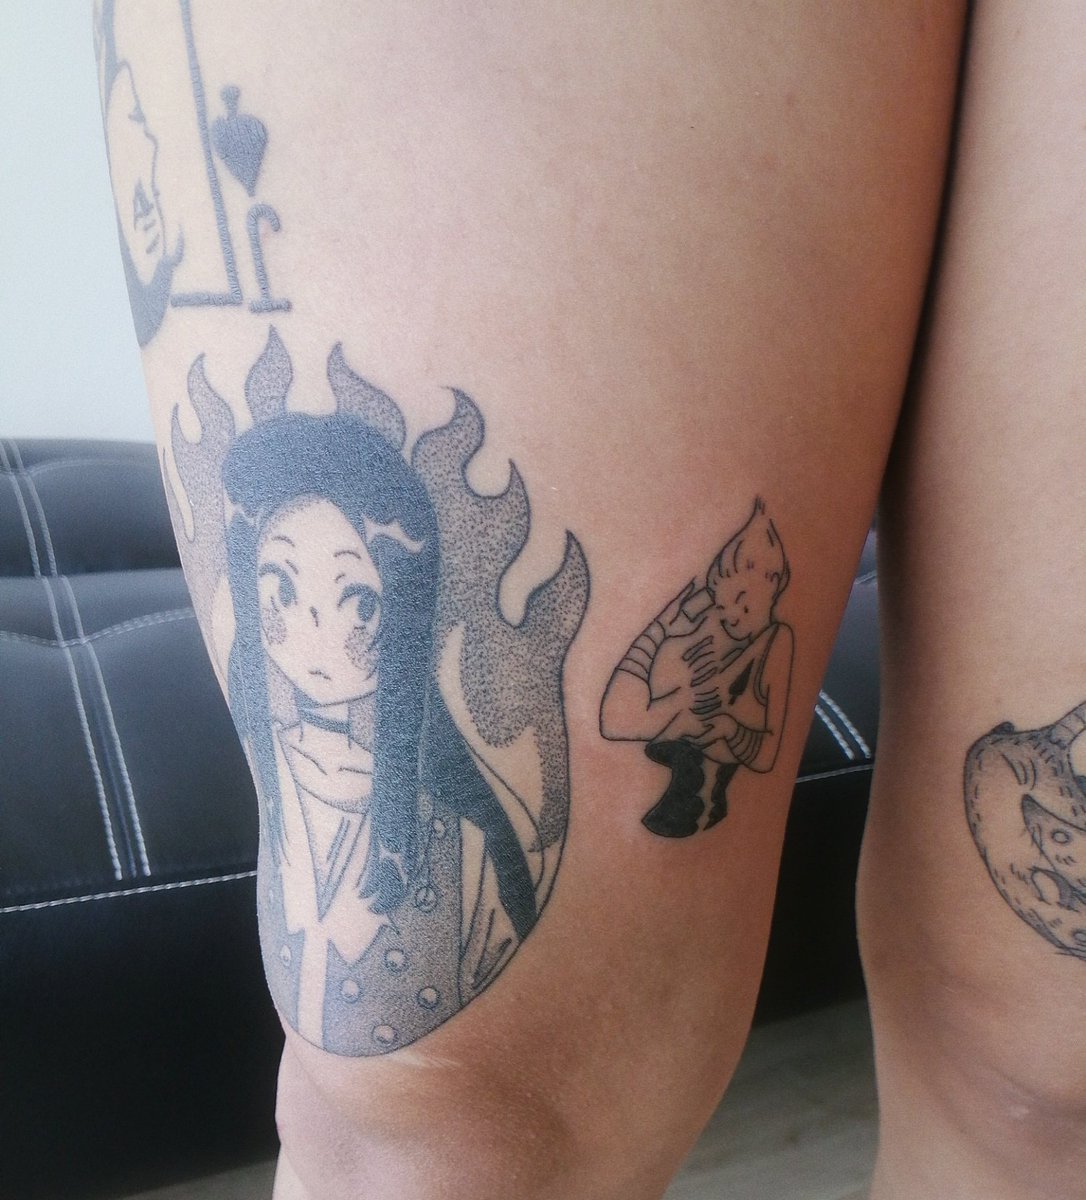 Got a new hiso tattoo!! Design by @semiveral ❤️❤️❤️ it's so cute I love him 🥺